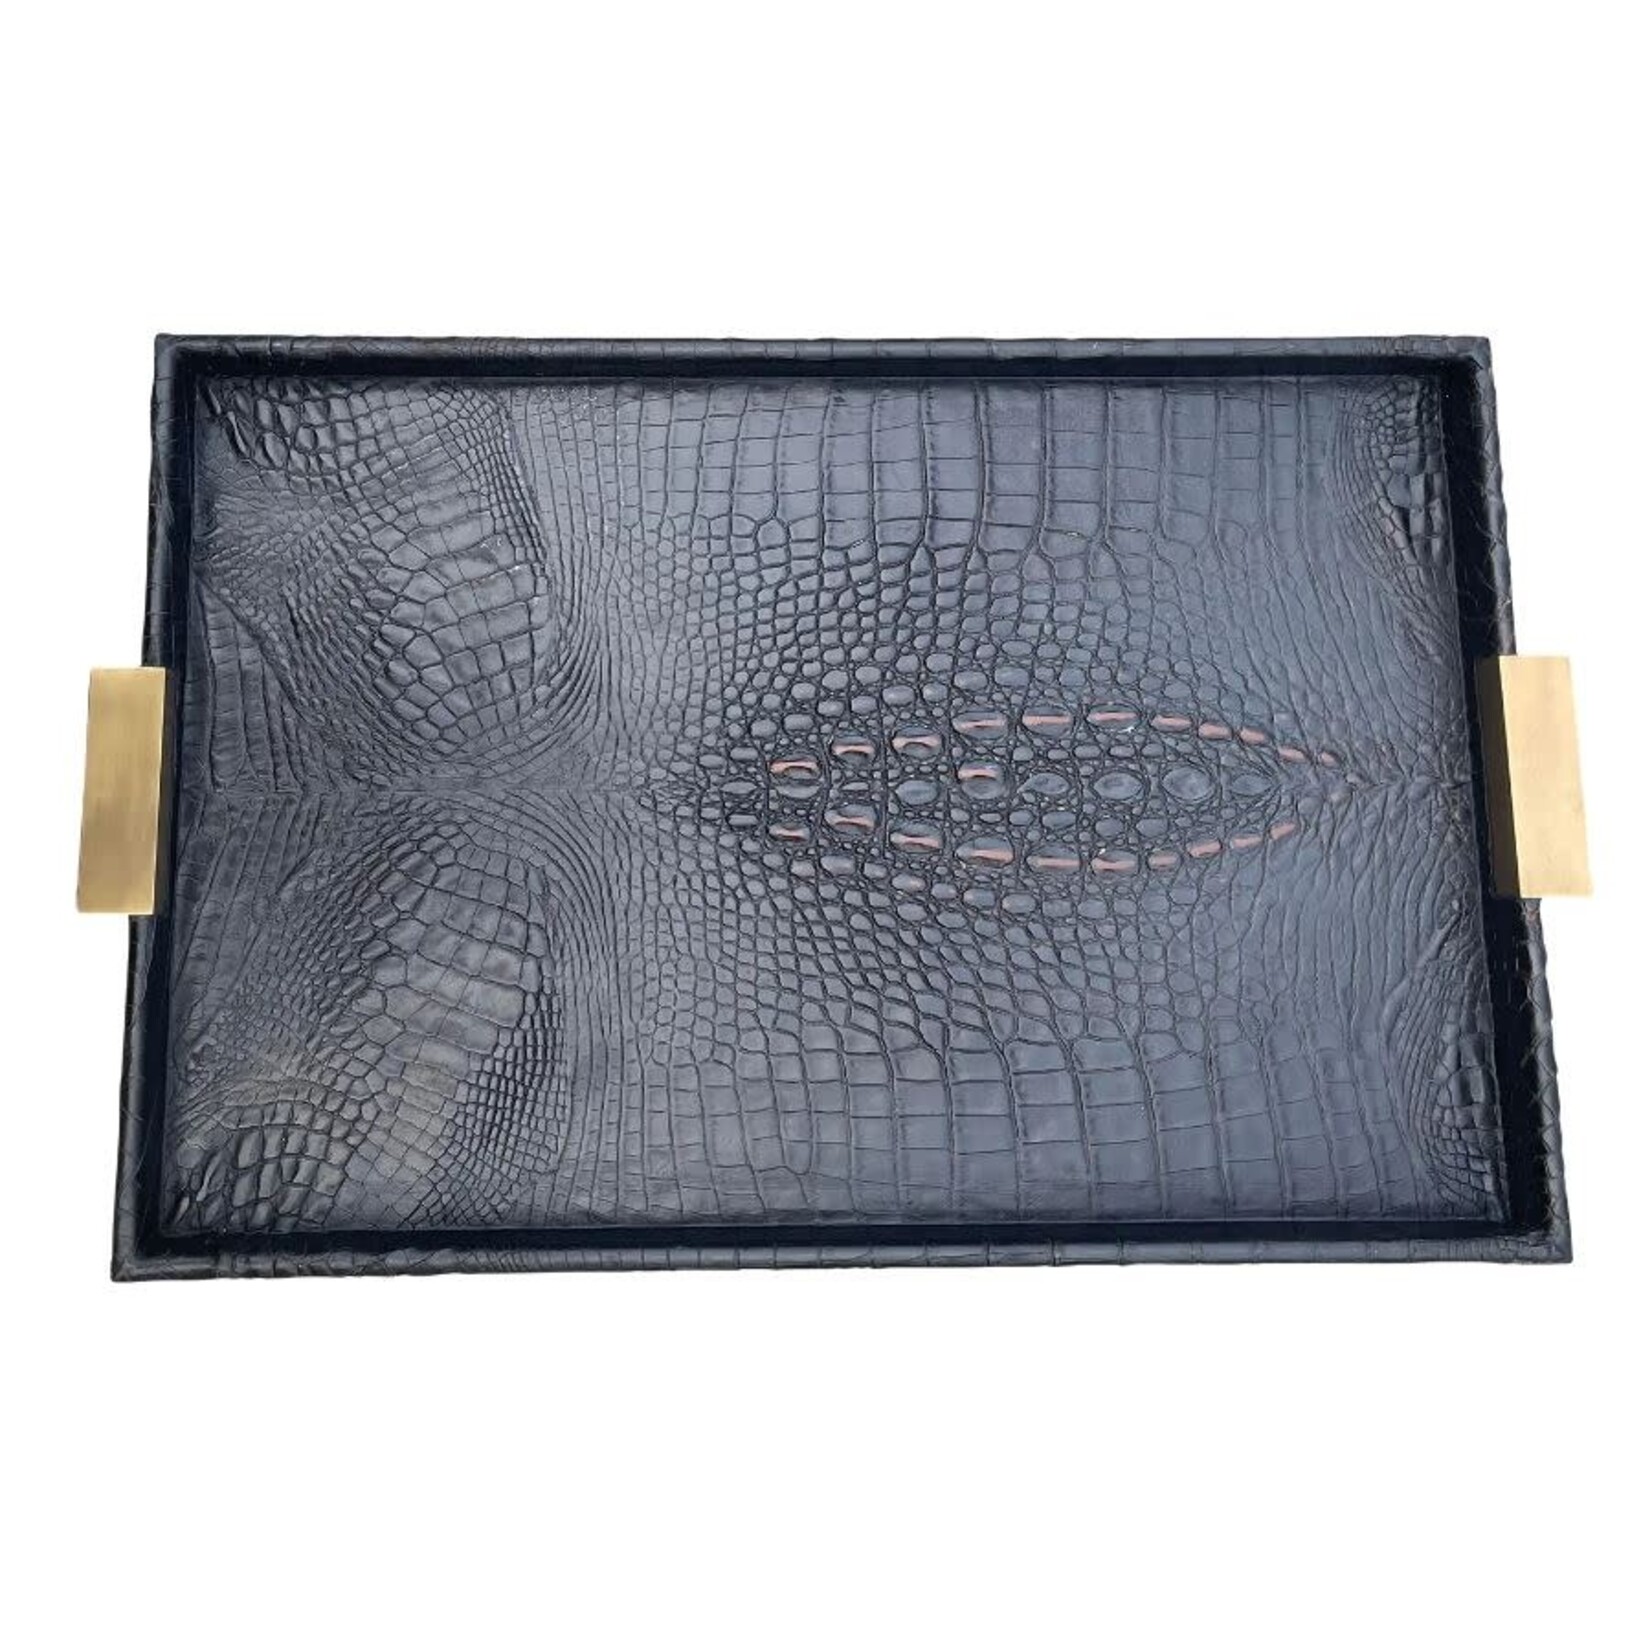 Theodore Alexander Alligator Leather Tray With Brass Handles